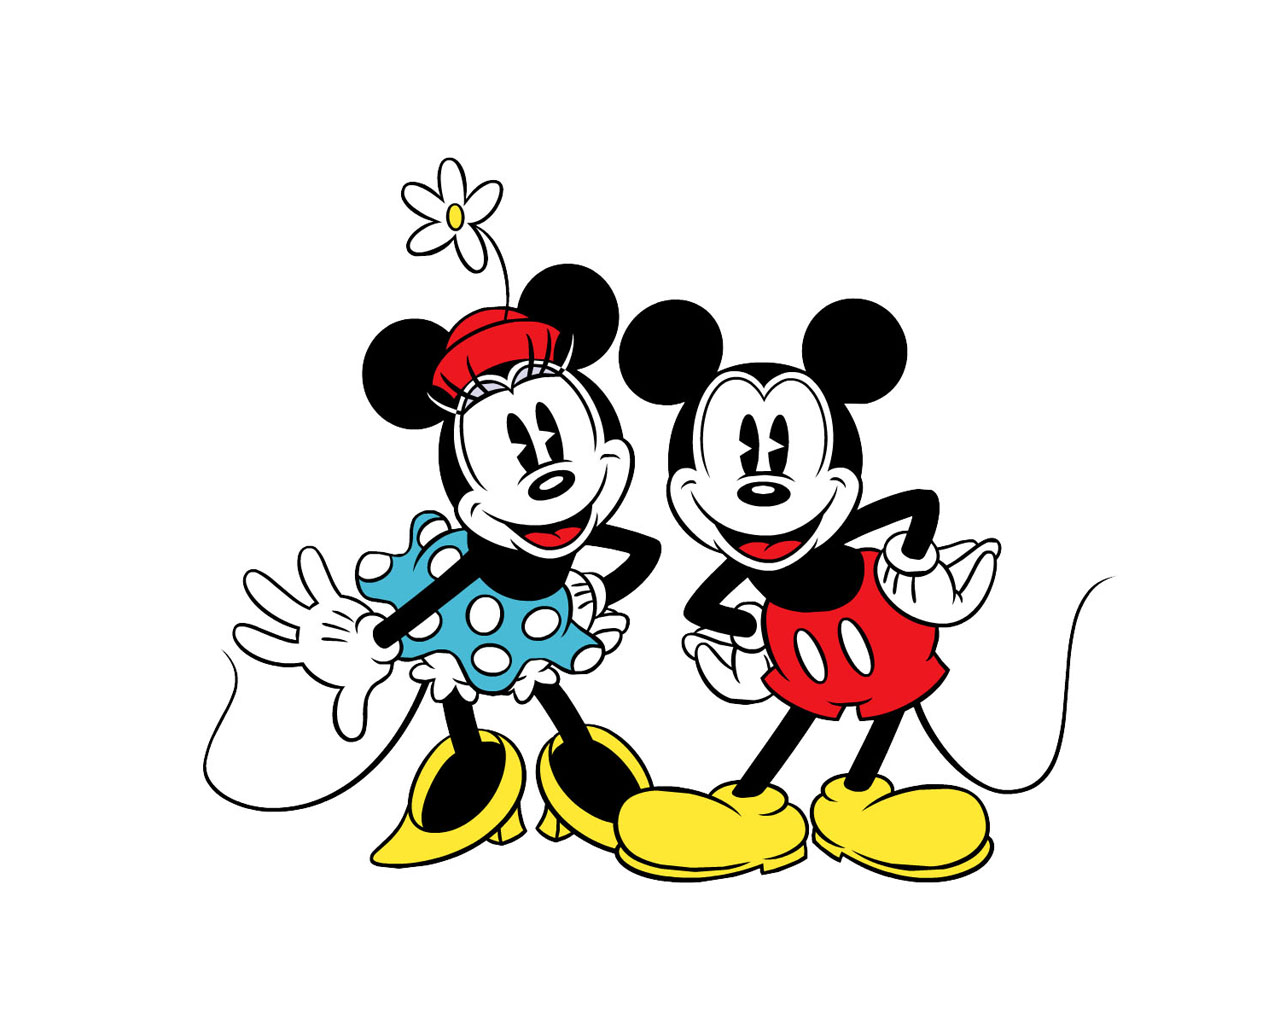 Mickey and Minnie Mouse | Today In Pop